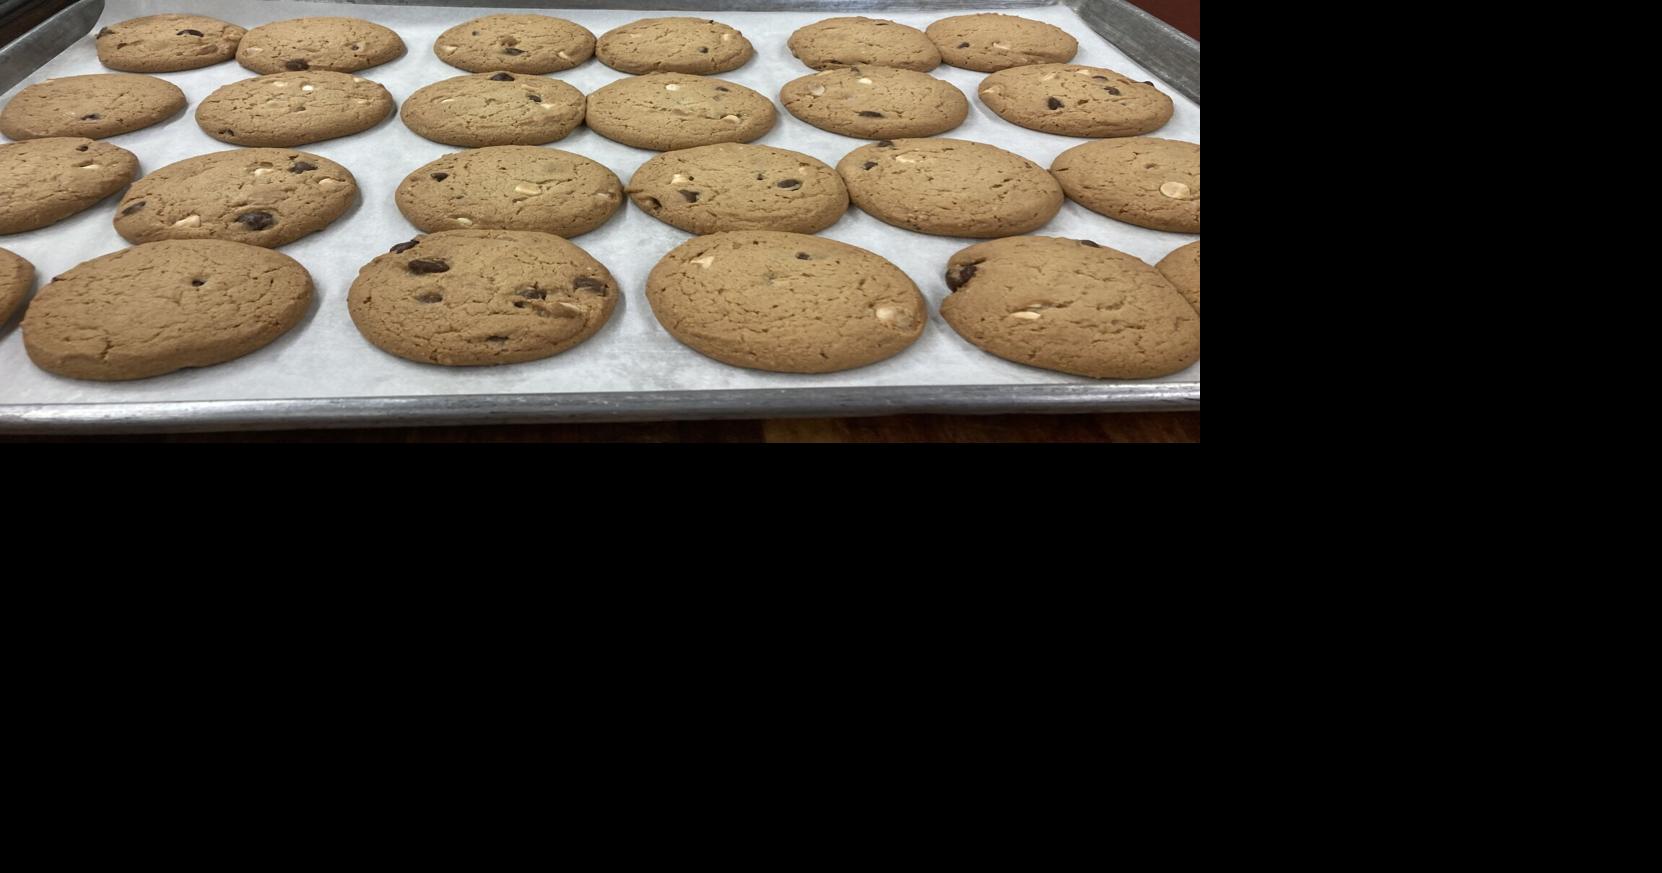 Two Rivers Correctional Institution operates booming bakery